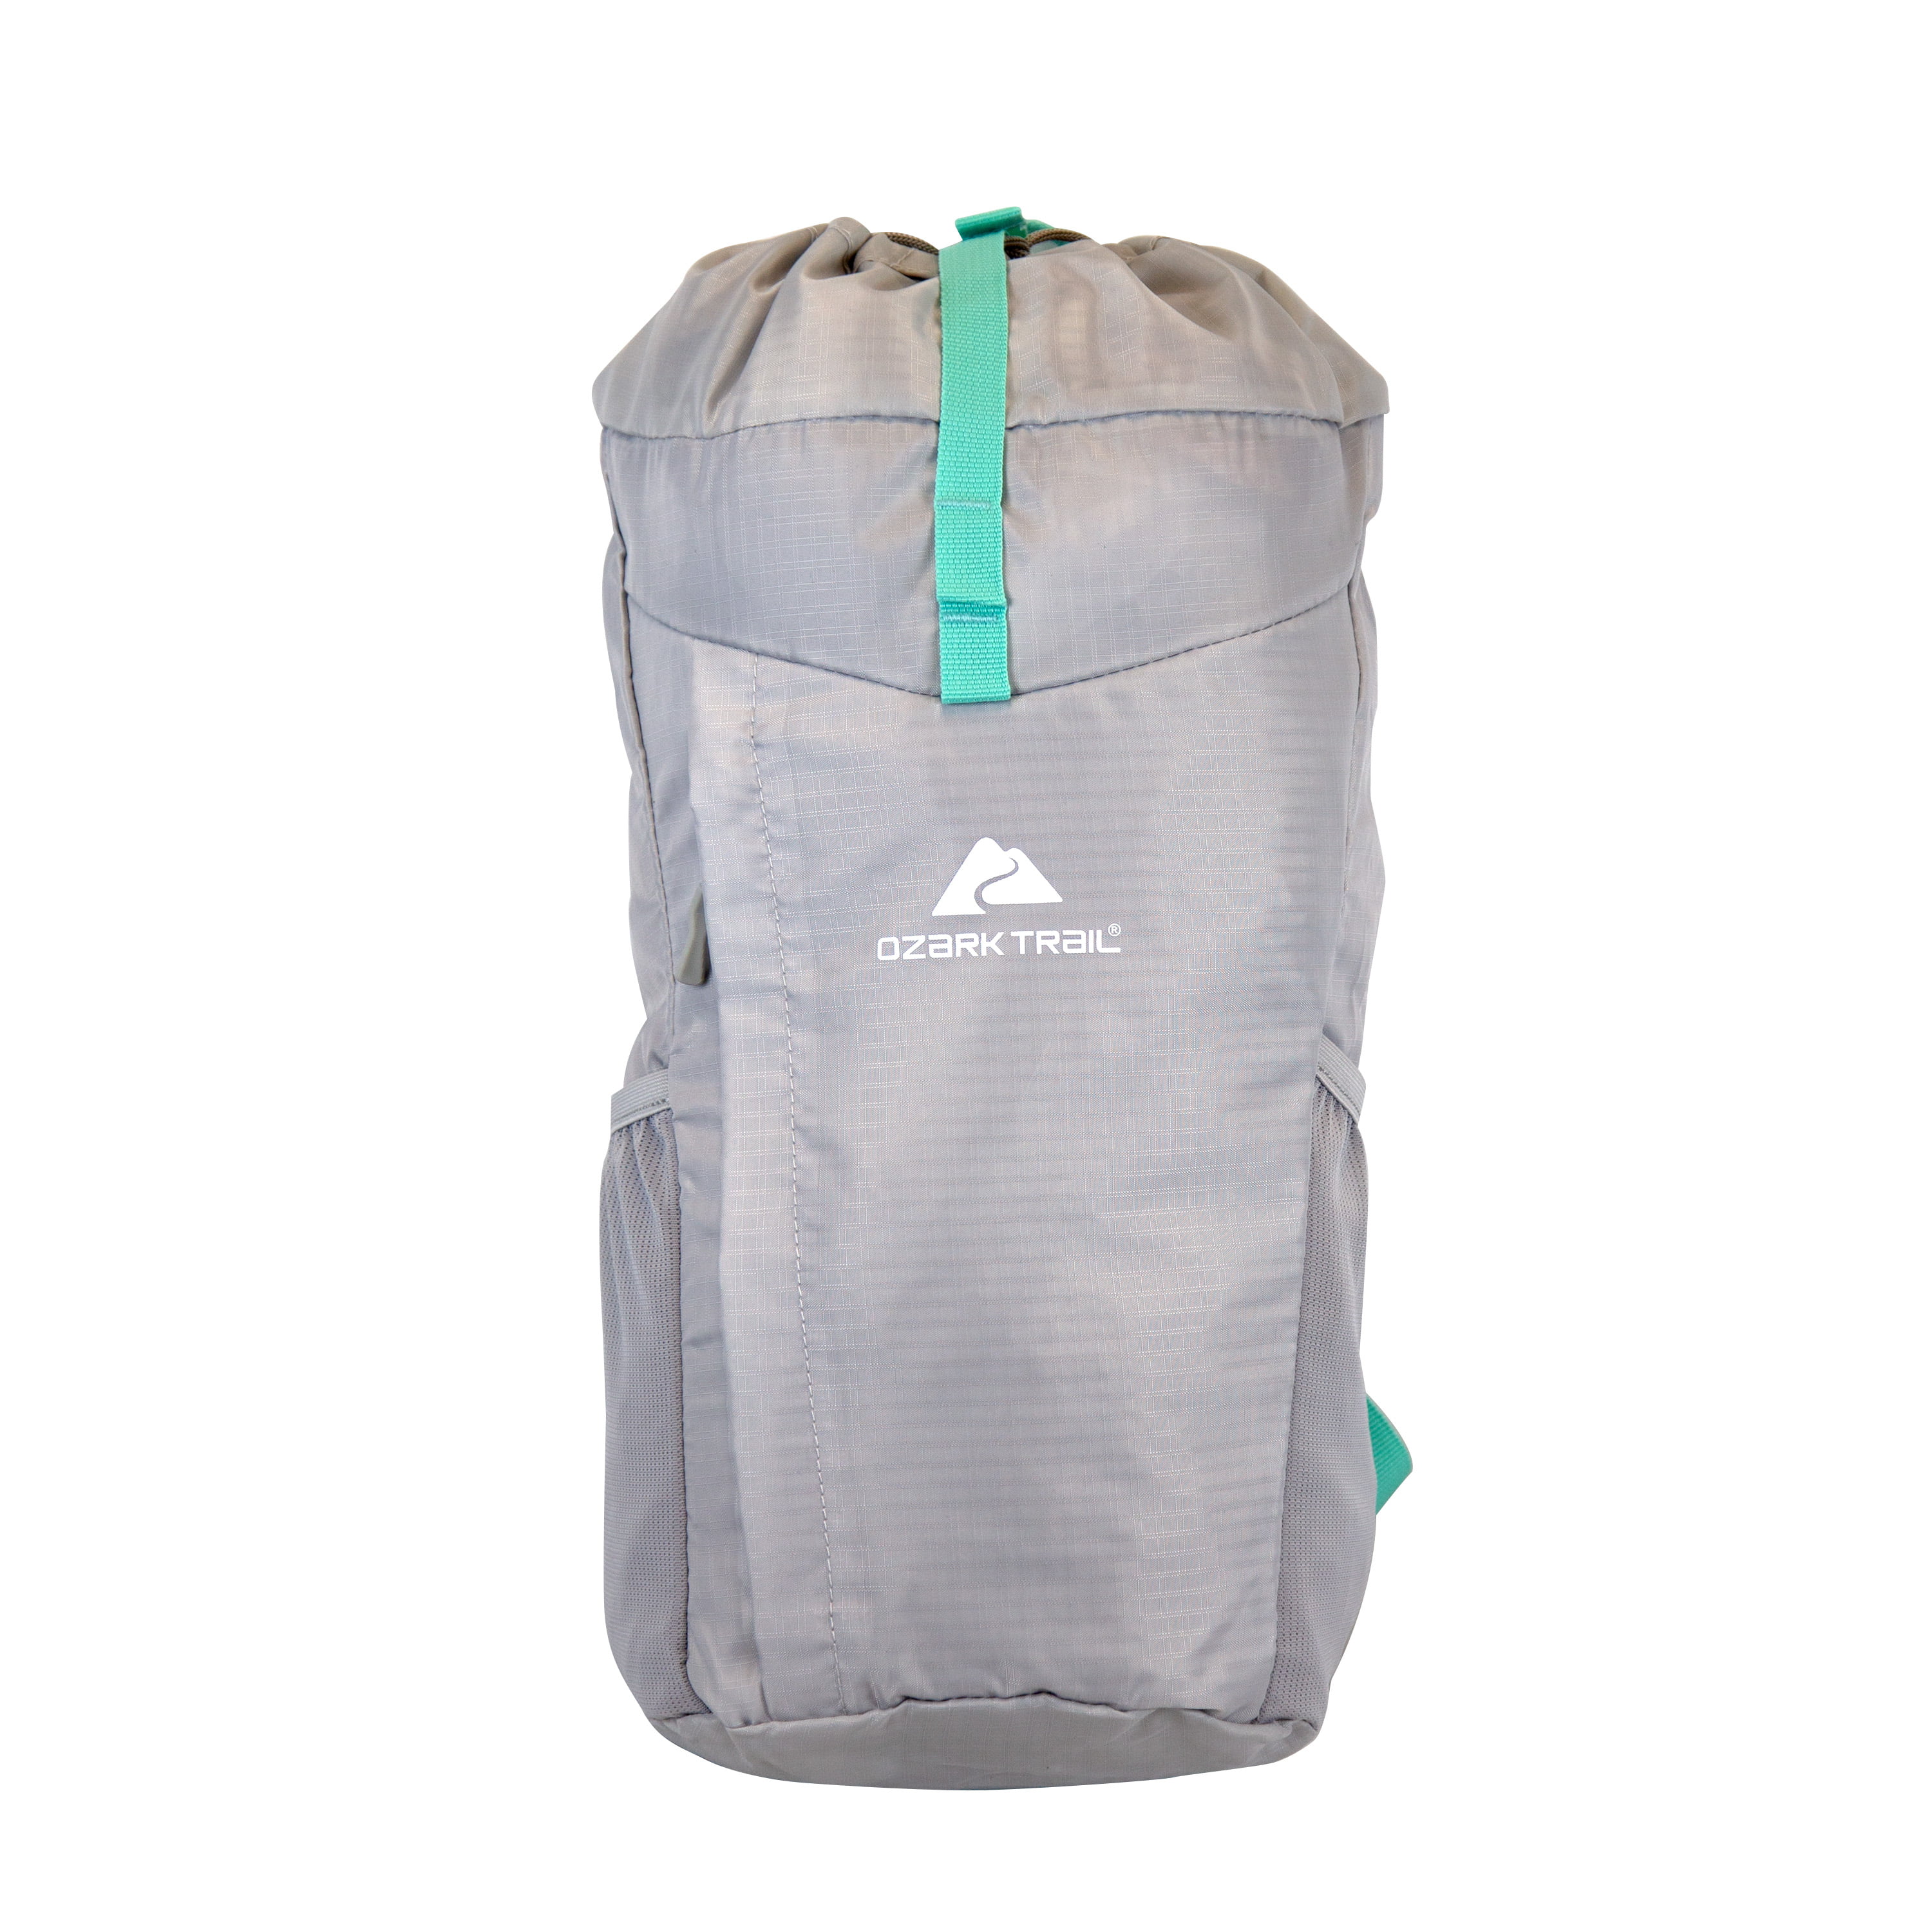 Ozark Trail 20L Corsicana Roll-Top Backpack, Hydration-Compatible, Gray $6.47